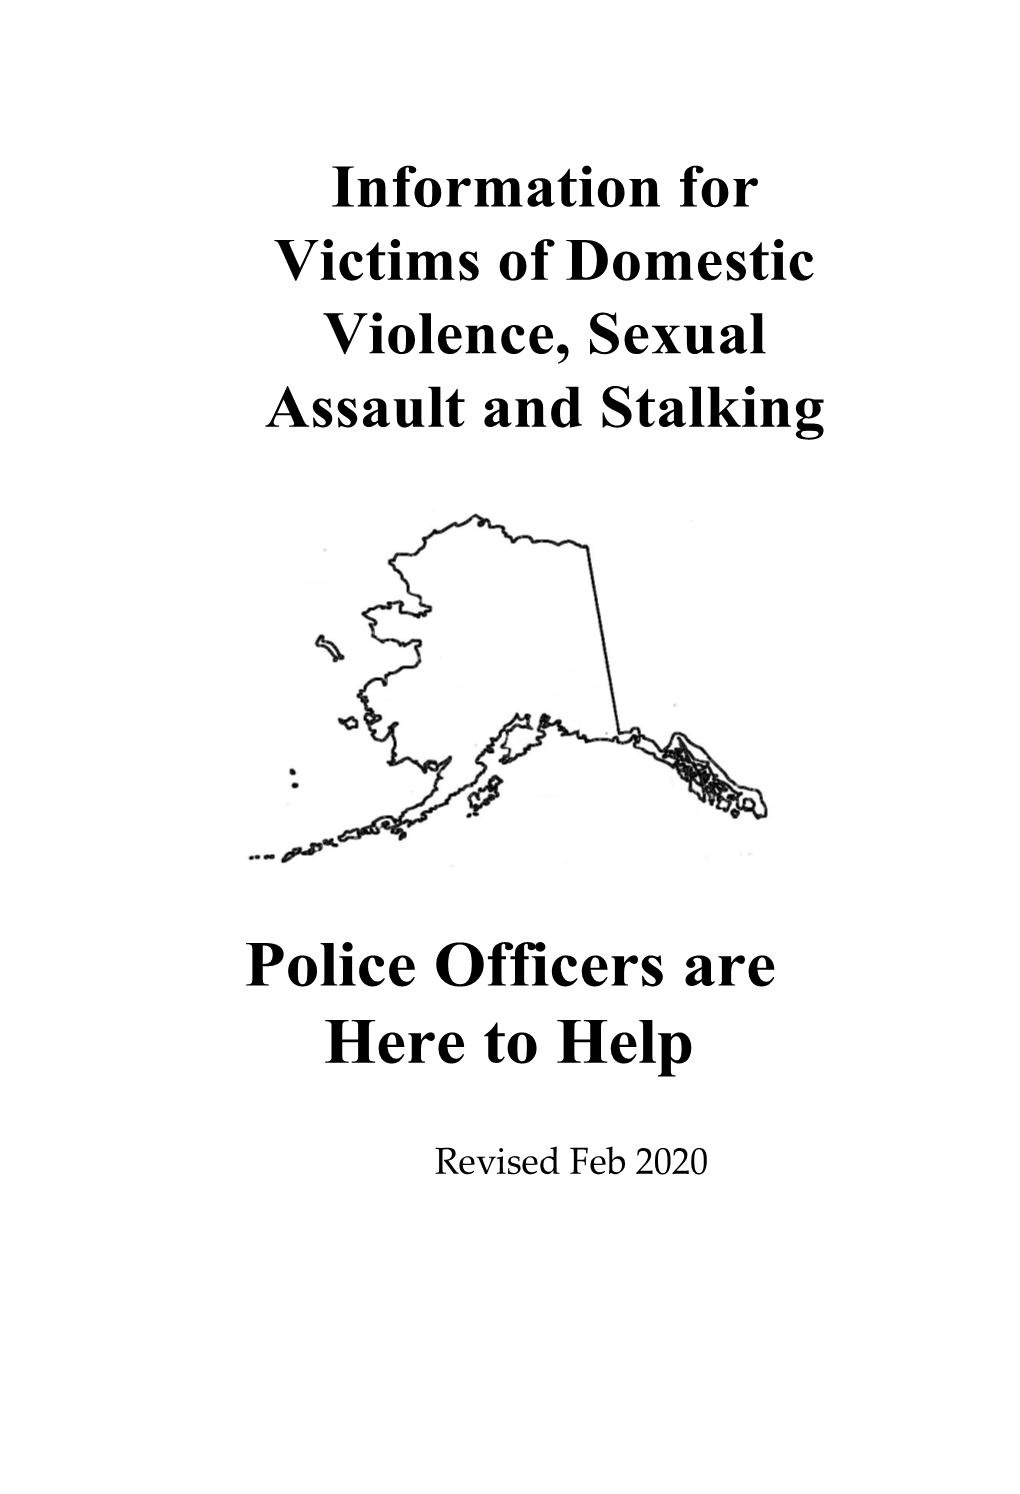 Information for Victims of Domestic Violence, Sexual Assault and Stalking